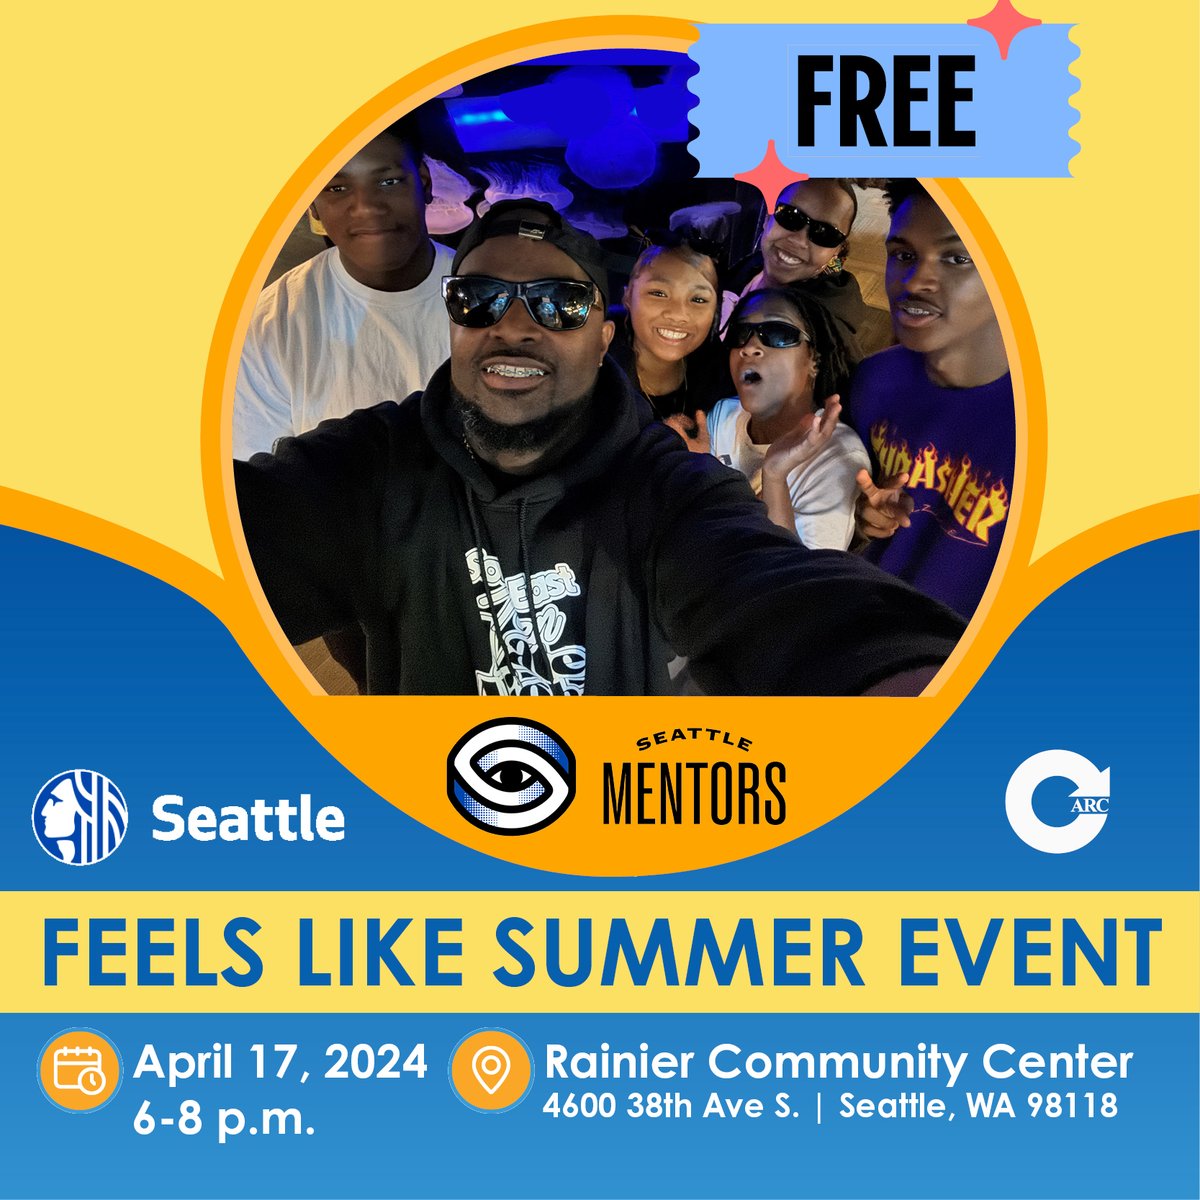 Seattle youth & young adults ages 13-24, join us on Wednesday, April 17 at Rainier Community Center for FREE food trucks, fun activities, & an opportunity to learn about great employment opportunities and programs this summer and fall! #SeattleMentors parkways.seattle.gov/2024/04/04/fre…